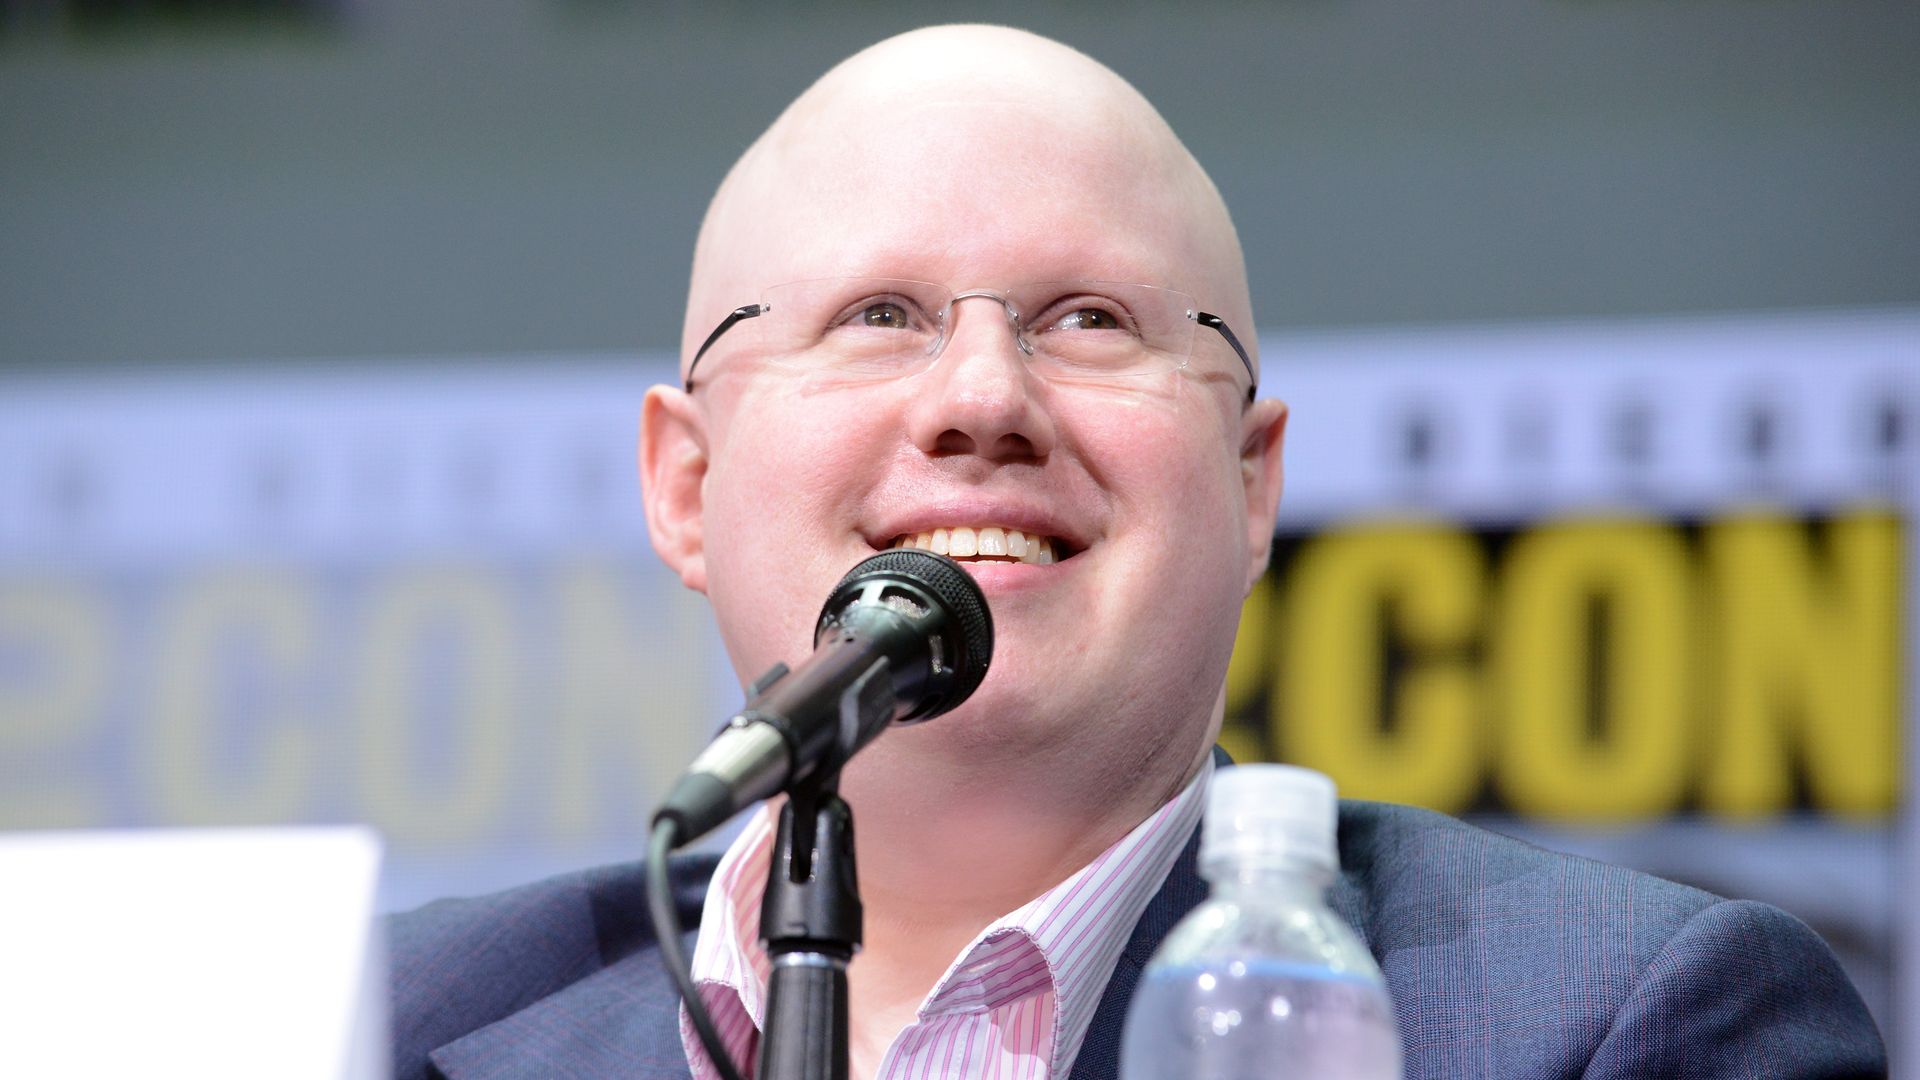 Matt Lucas smiling while sat on stage at comic con a mic is in front of him